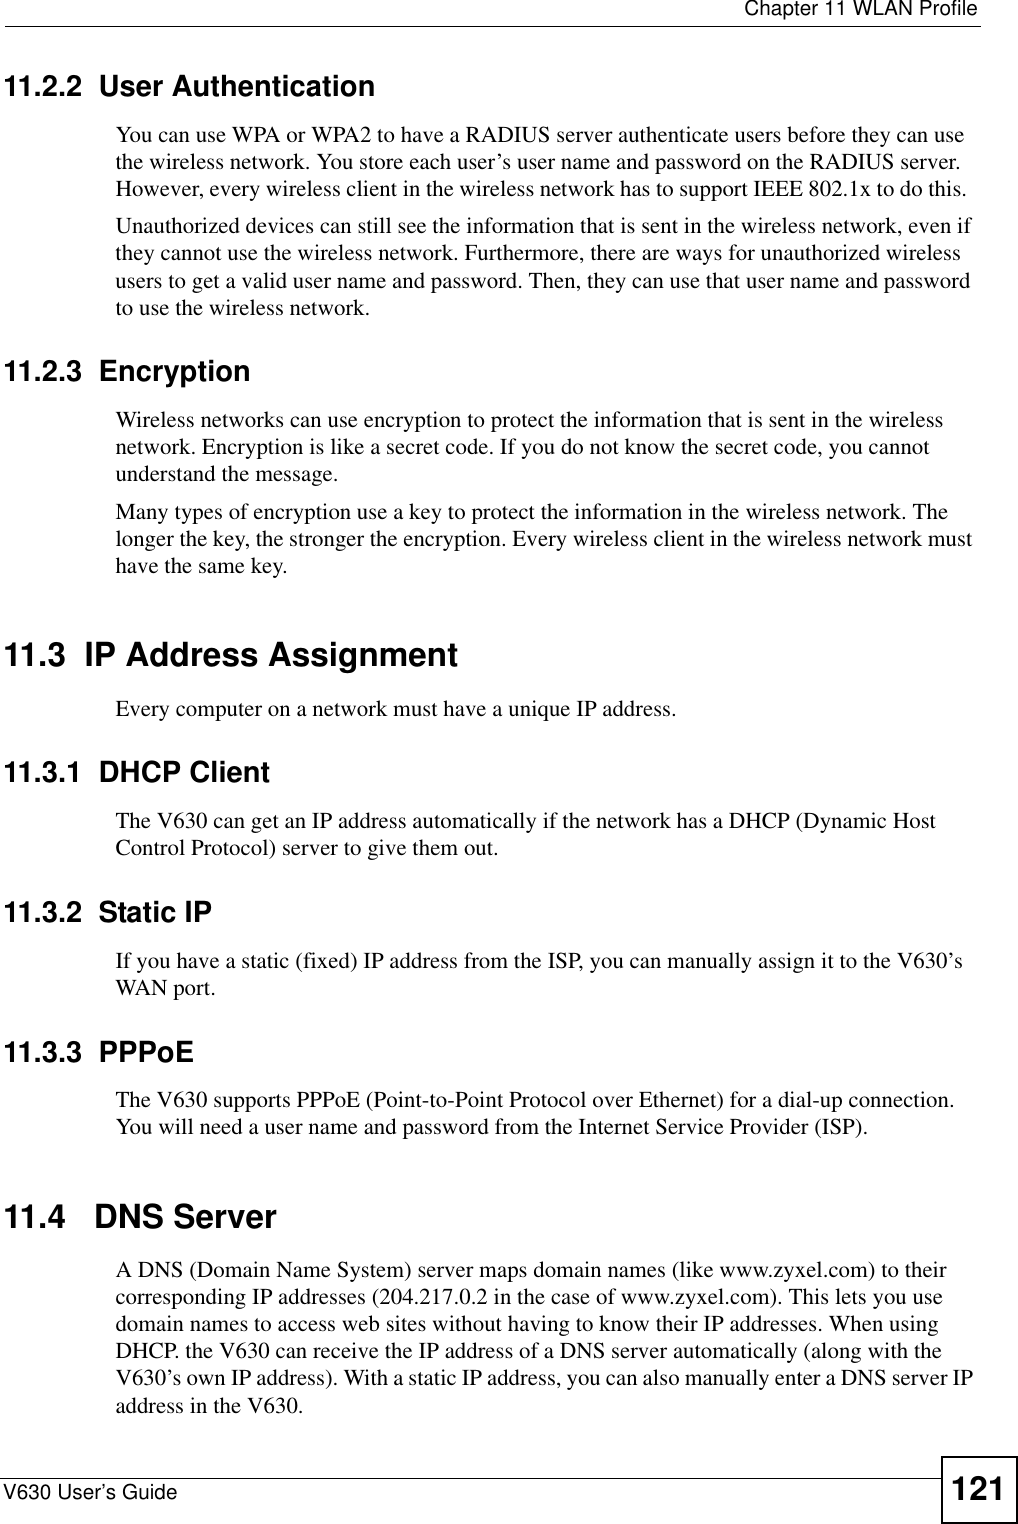  Chapter 11 WLAN ProfileV630 User’s Guide 12111.2.2  User AuthenticationYou can use WPA or WPA2 to have a RADIUS server authenticate users before they can use the wireless network. You store each user’s user name and password on the RADIUS server. However, every wireless client in the wireless network has to support IEEE 802.1x to do this.  Unauthorized devices can still see the information that is sent in the wireless network, even if they cannot use the wireless network. Furthermore, there are ways for unauthorized wireless users to get a valid user name and password. Then, they can use that user name and password to use the wireless network.11.2.3  EncryptionWireless networks can use encryption to protect the information that is sent in the wireless network. Encryption is like a secret code. If you do not know the secret code, you cannot understand the message.Many types of encryption use a key to protect the information in the wireless network. The longer the key, the stronger the encryption. Every wireless client in the wireless network must have the same key.11.3  IP Address Assignment Every computer on a network must have a unique IP address. 11.3.1  DHCP ClientThe V630 can get an IP address automatically if the network has a DHCP (Dynamic Host Control Protocol) server to give them out. 11.3.2  Static IPIf you have a static (fixed) IP address from the ISP, you can manually assign it to the V630’s WAN port.11.3.3  PPPoEThe V630 supports PPPoE (Point-to-Point Protocol over Ethernet) for a dial-up connection. You will need a user name and password from the Internet Service Provider (ISP).11.4   DNS Server A DNS (Domain Name System) server maps domain names (like www.zyxel.com) to their corresponding IP addresses (204.217.0.2 in the case of www.zyxel.com). This lets you use domain names to access web sites without having to know their IP addresses. When using DHCP. the V630 can receive the IP address of a DNS server automatically (along with the V630’s own IP address). With a static IP address, you can also manually enter a DNS server IP address in the V630.